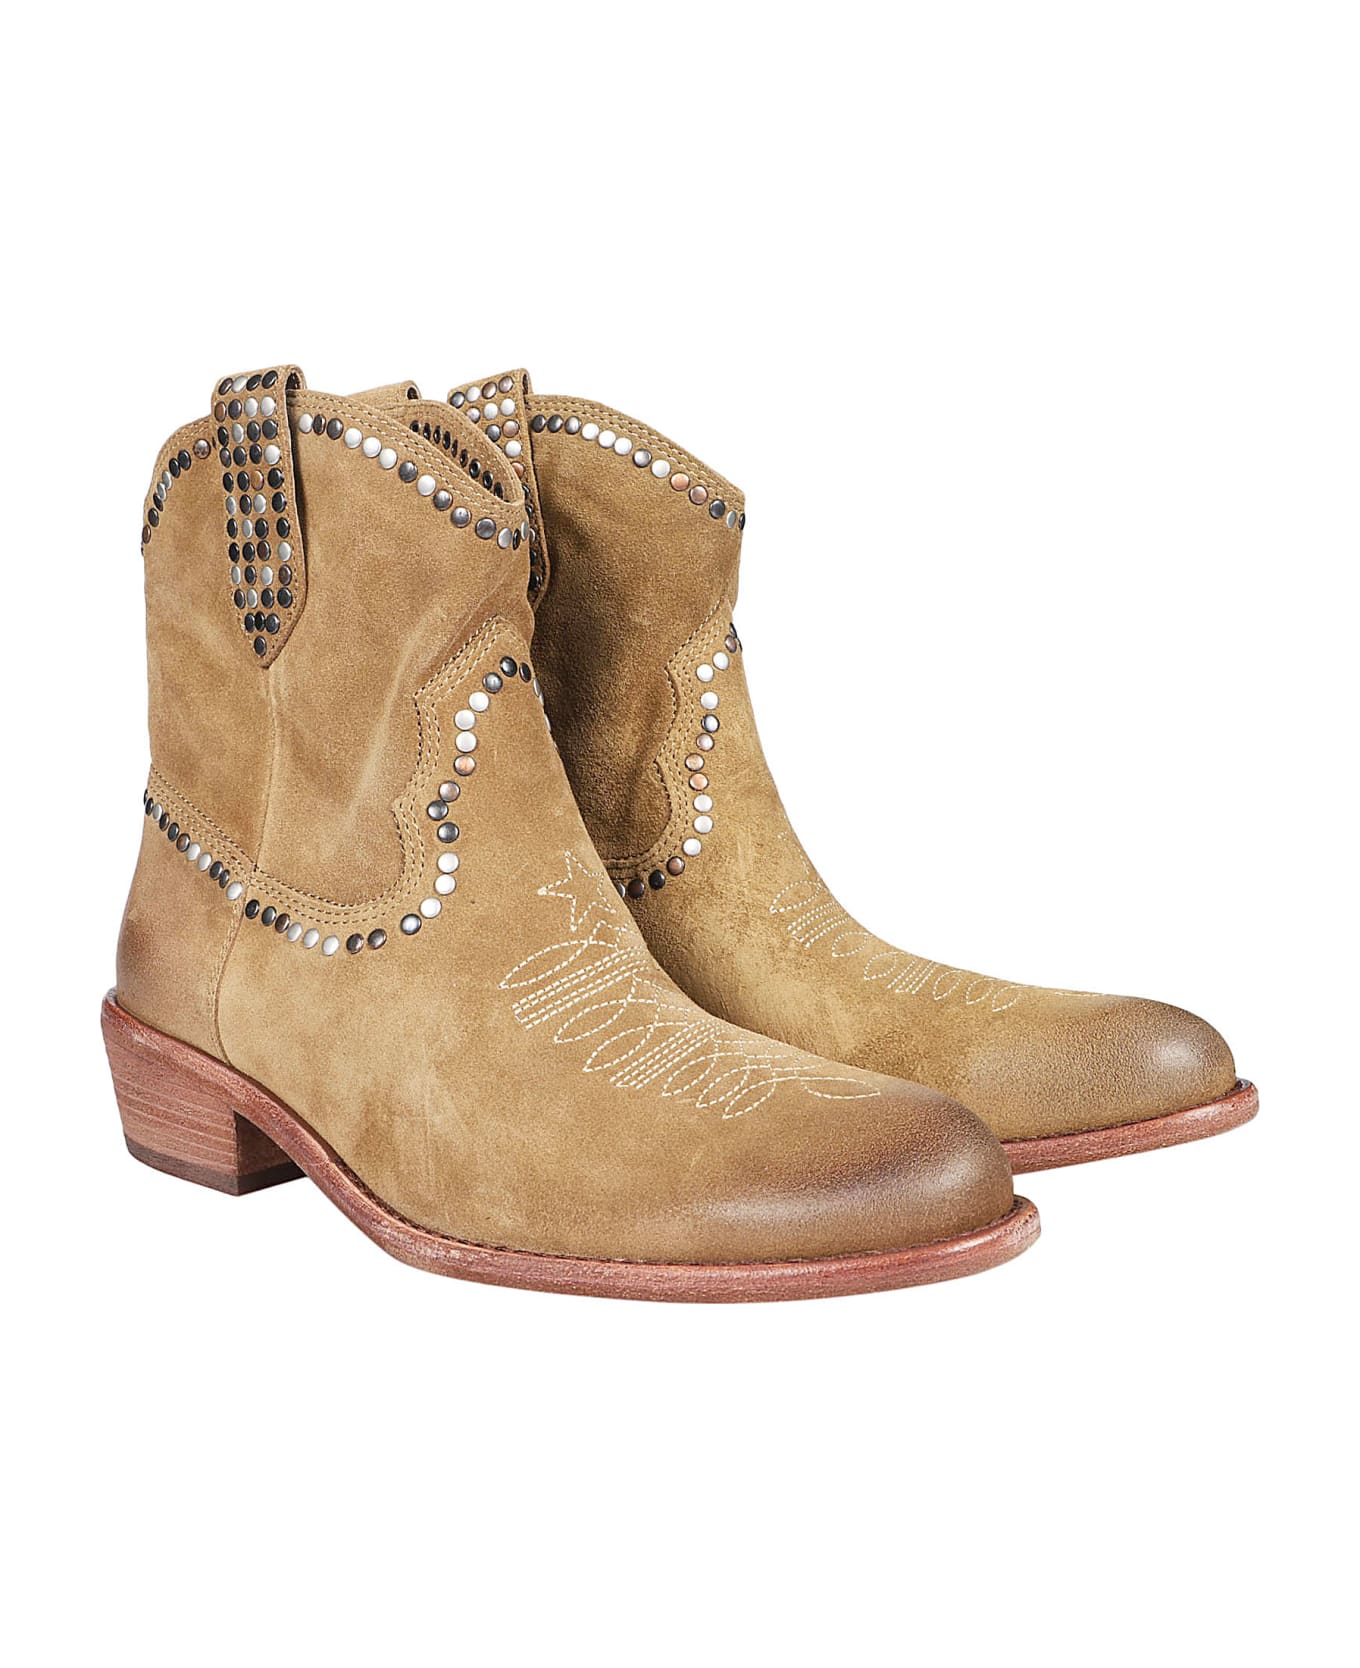 Ash Gipsy Texan Ankle Boots - Antilope ブーツ